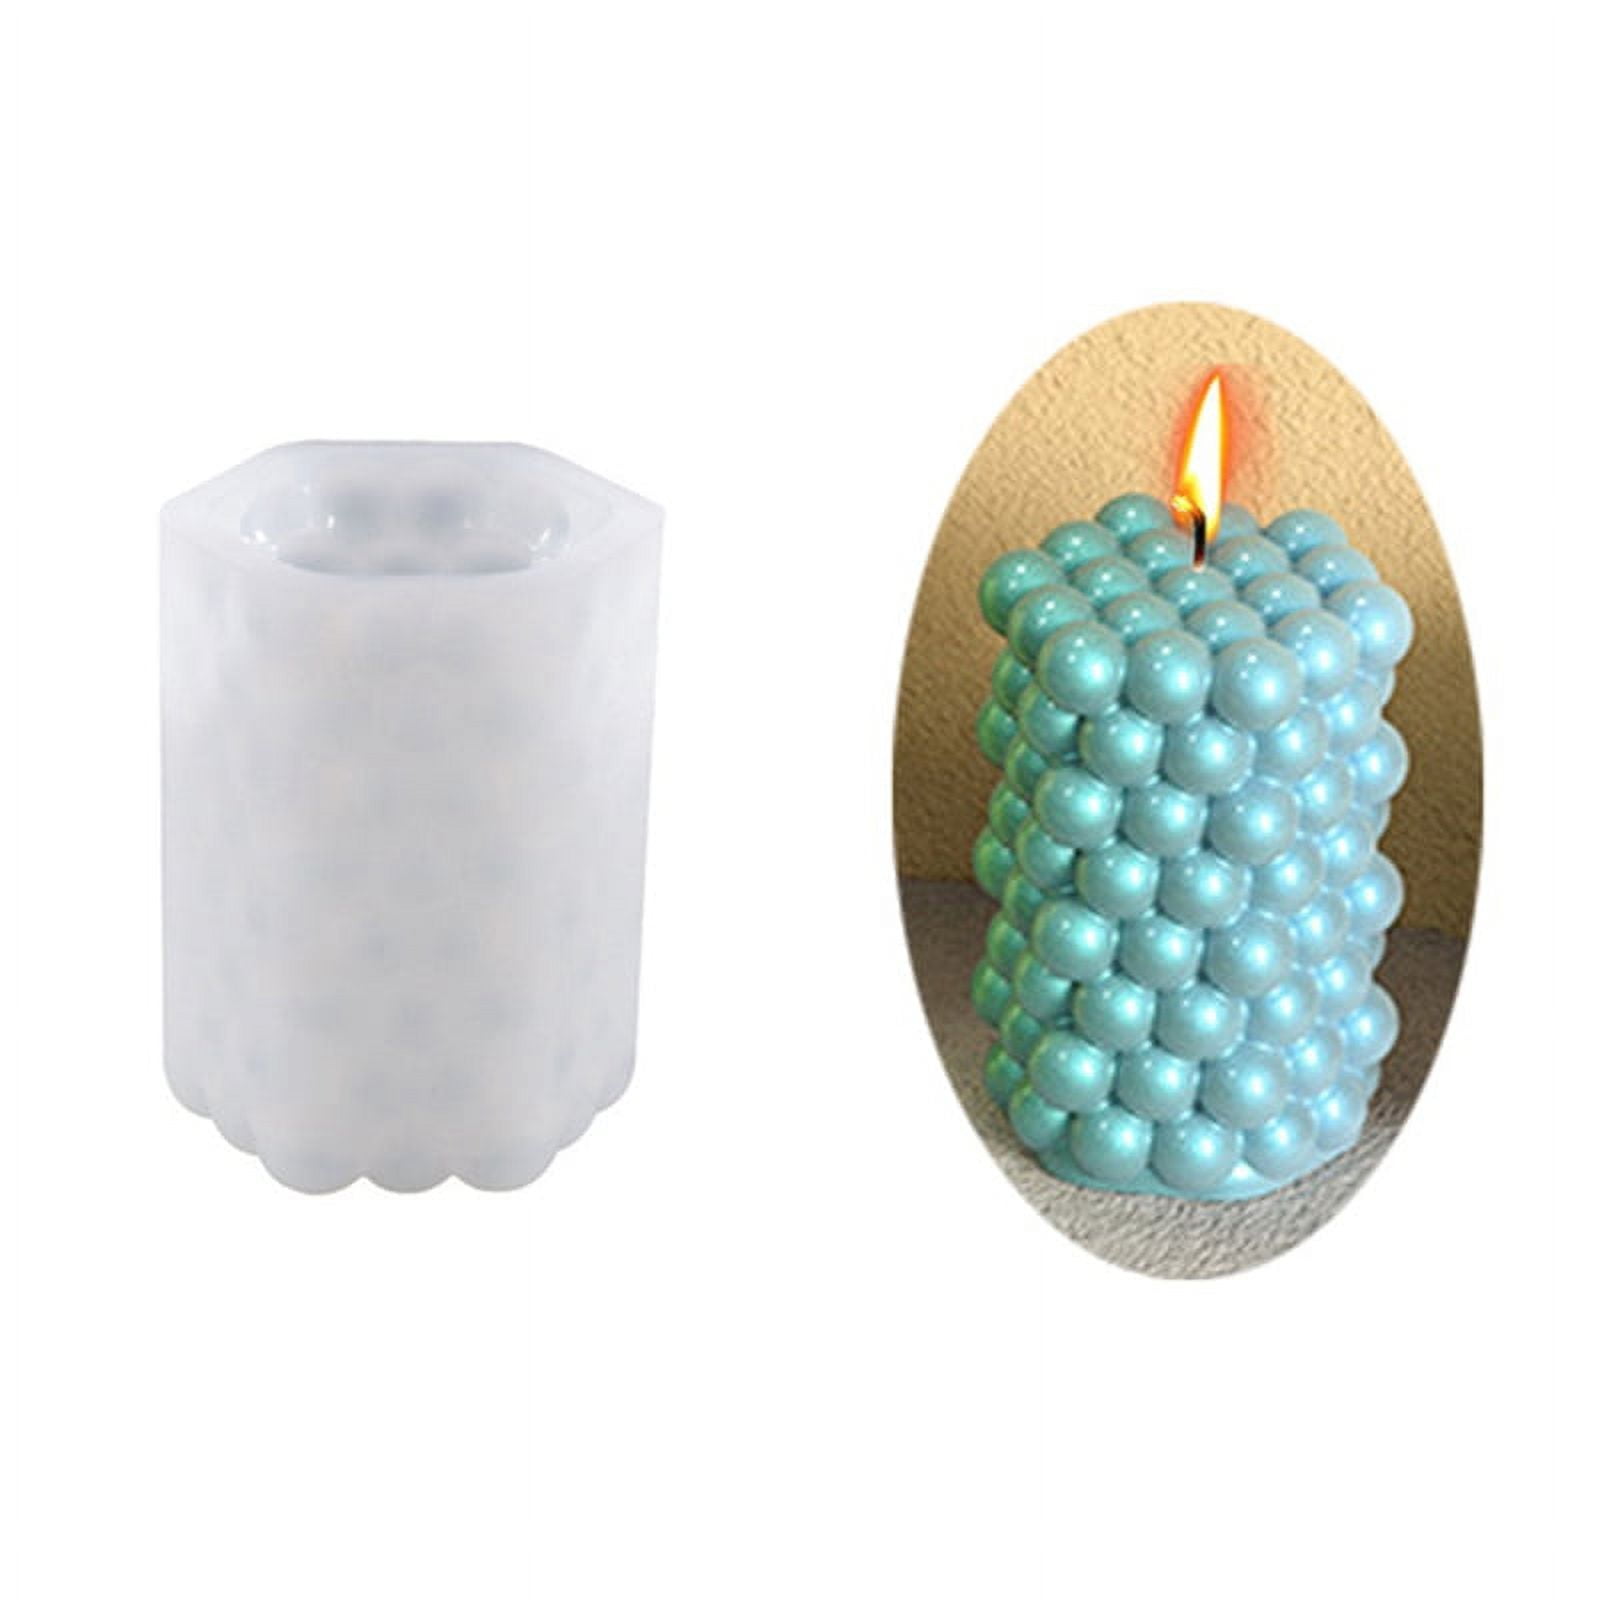 Leaveforme Candle Molds Silicone, Easter Egg Shape Candle molds